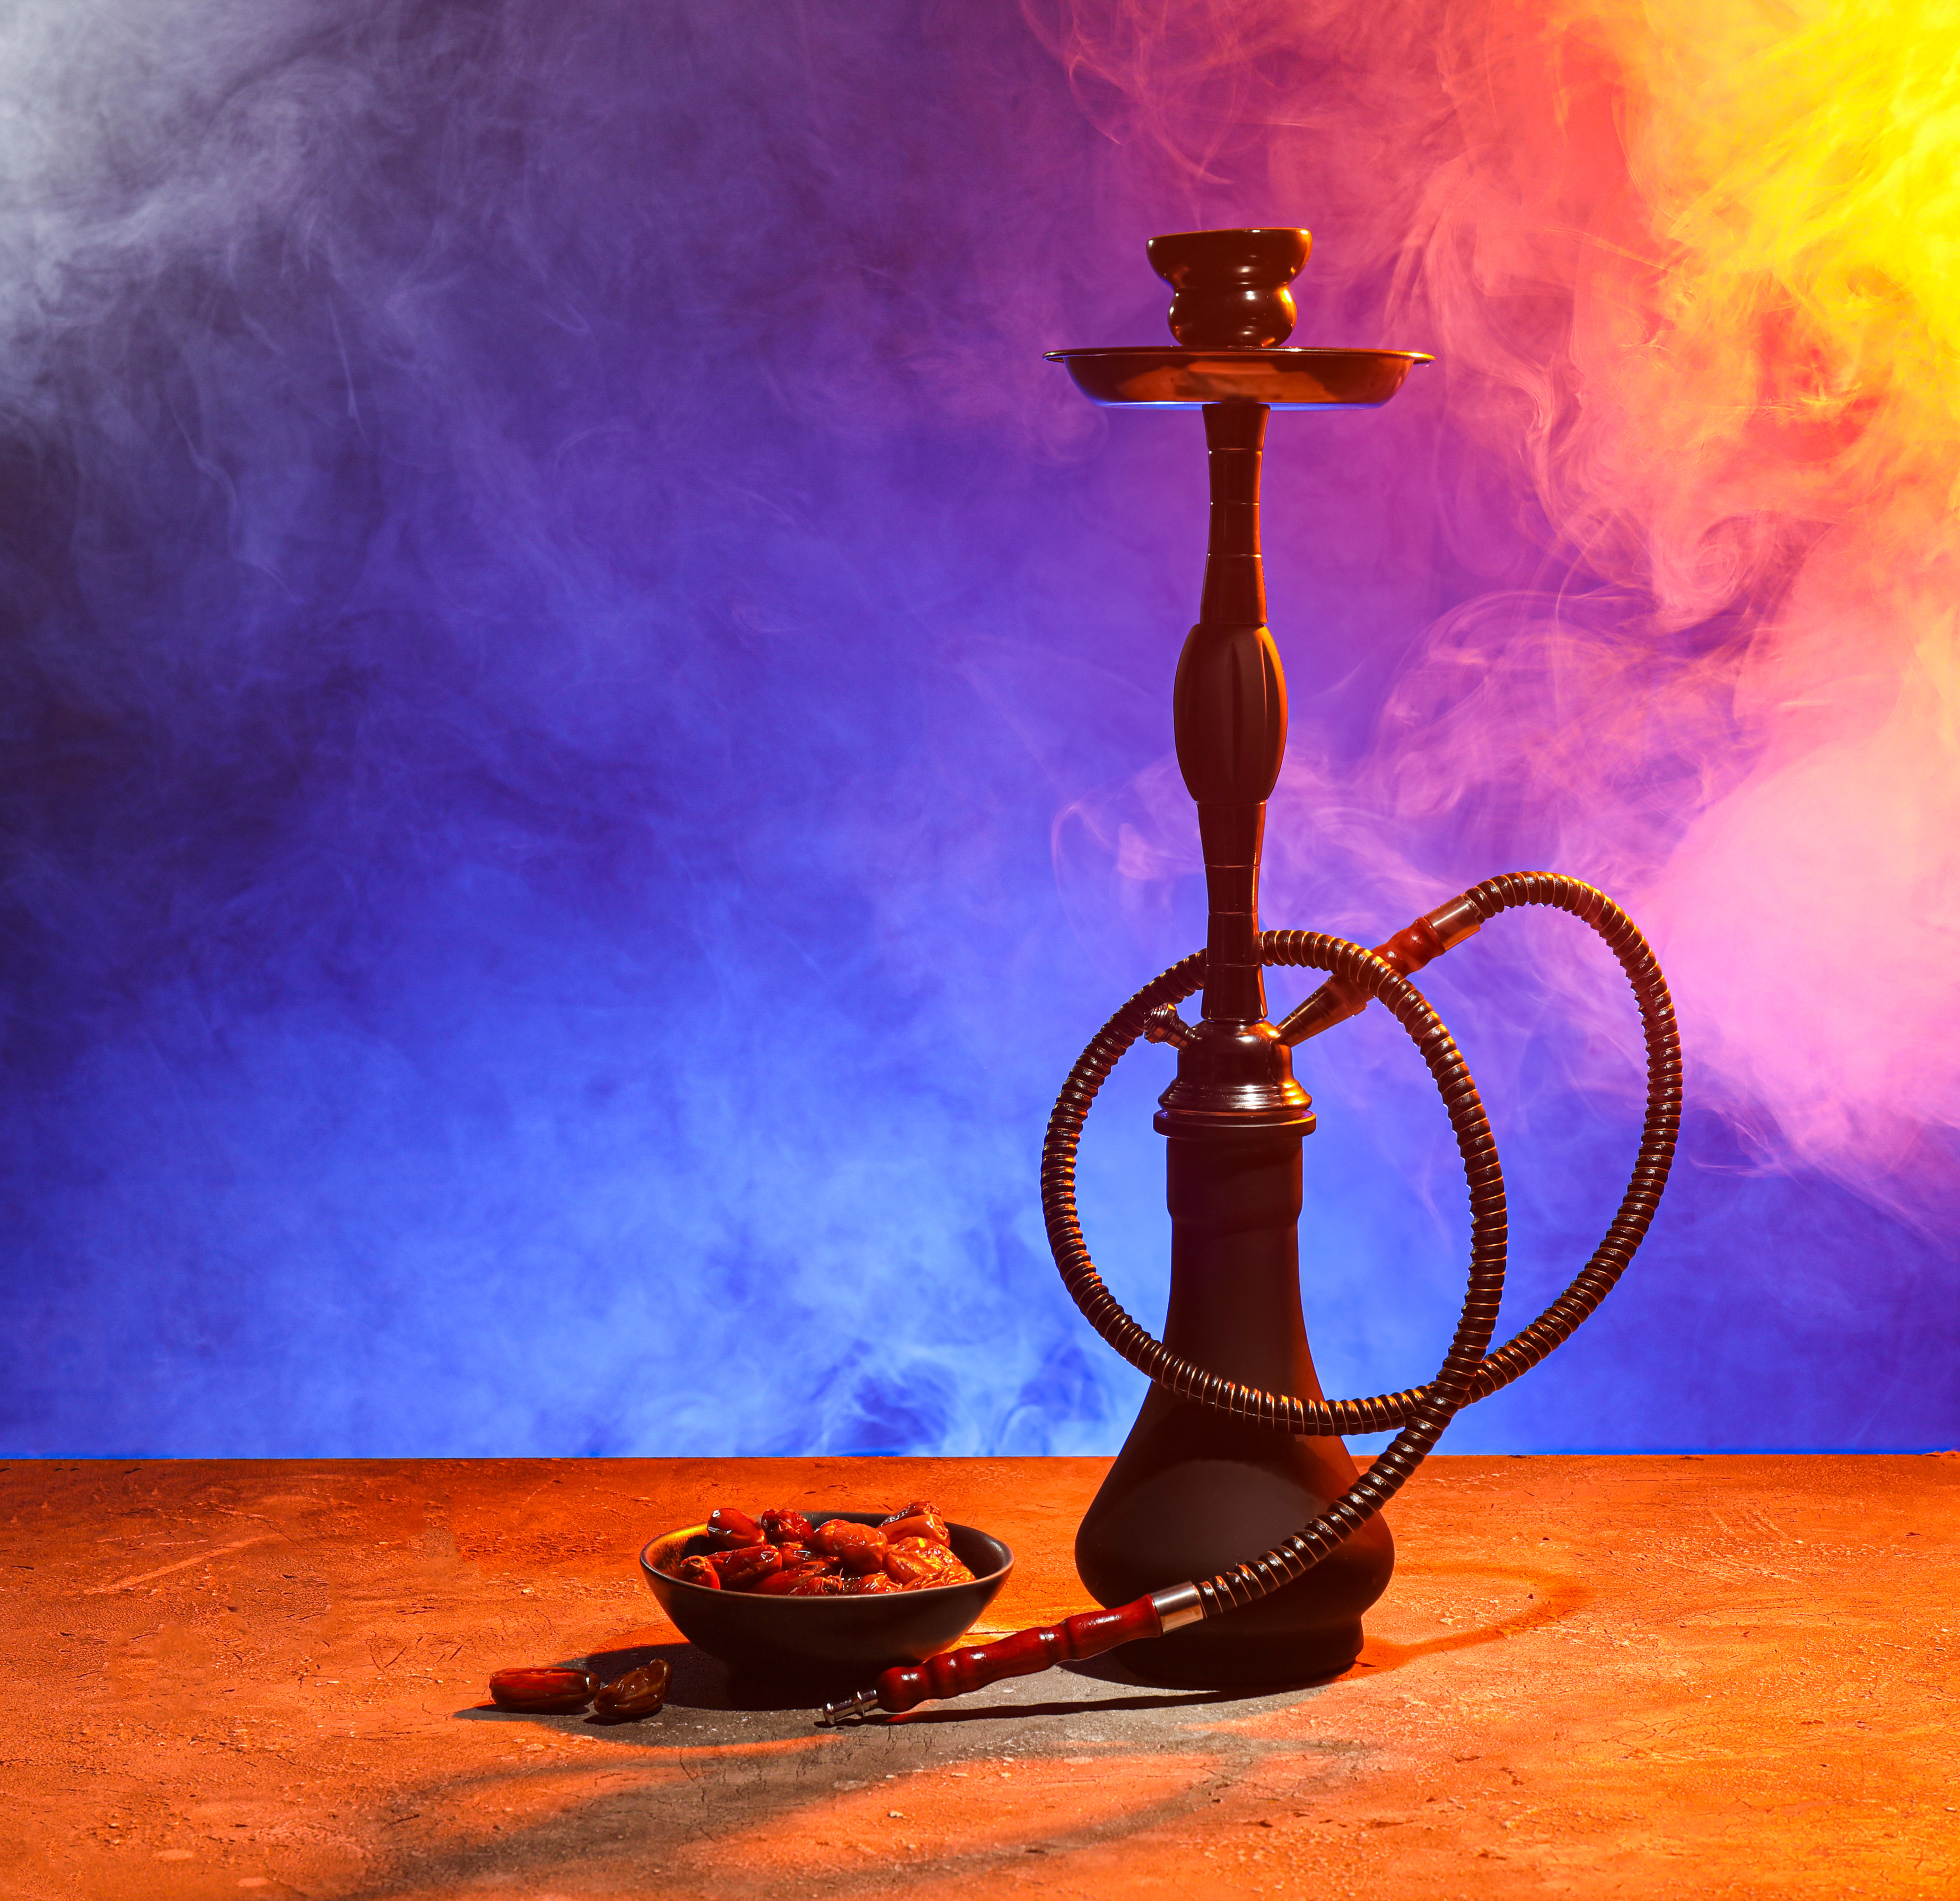 Hookah and Dates on Table